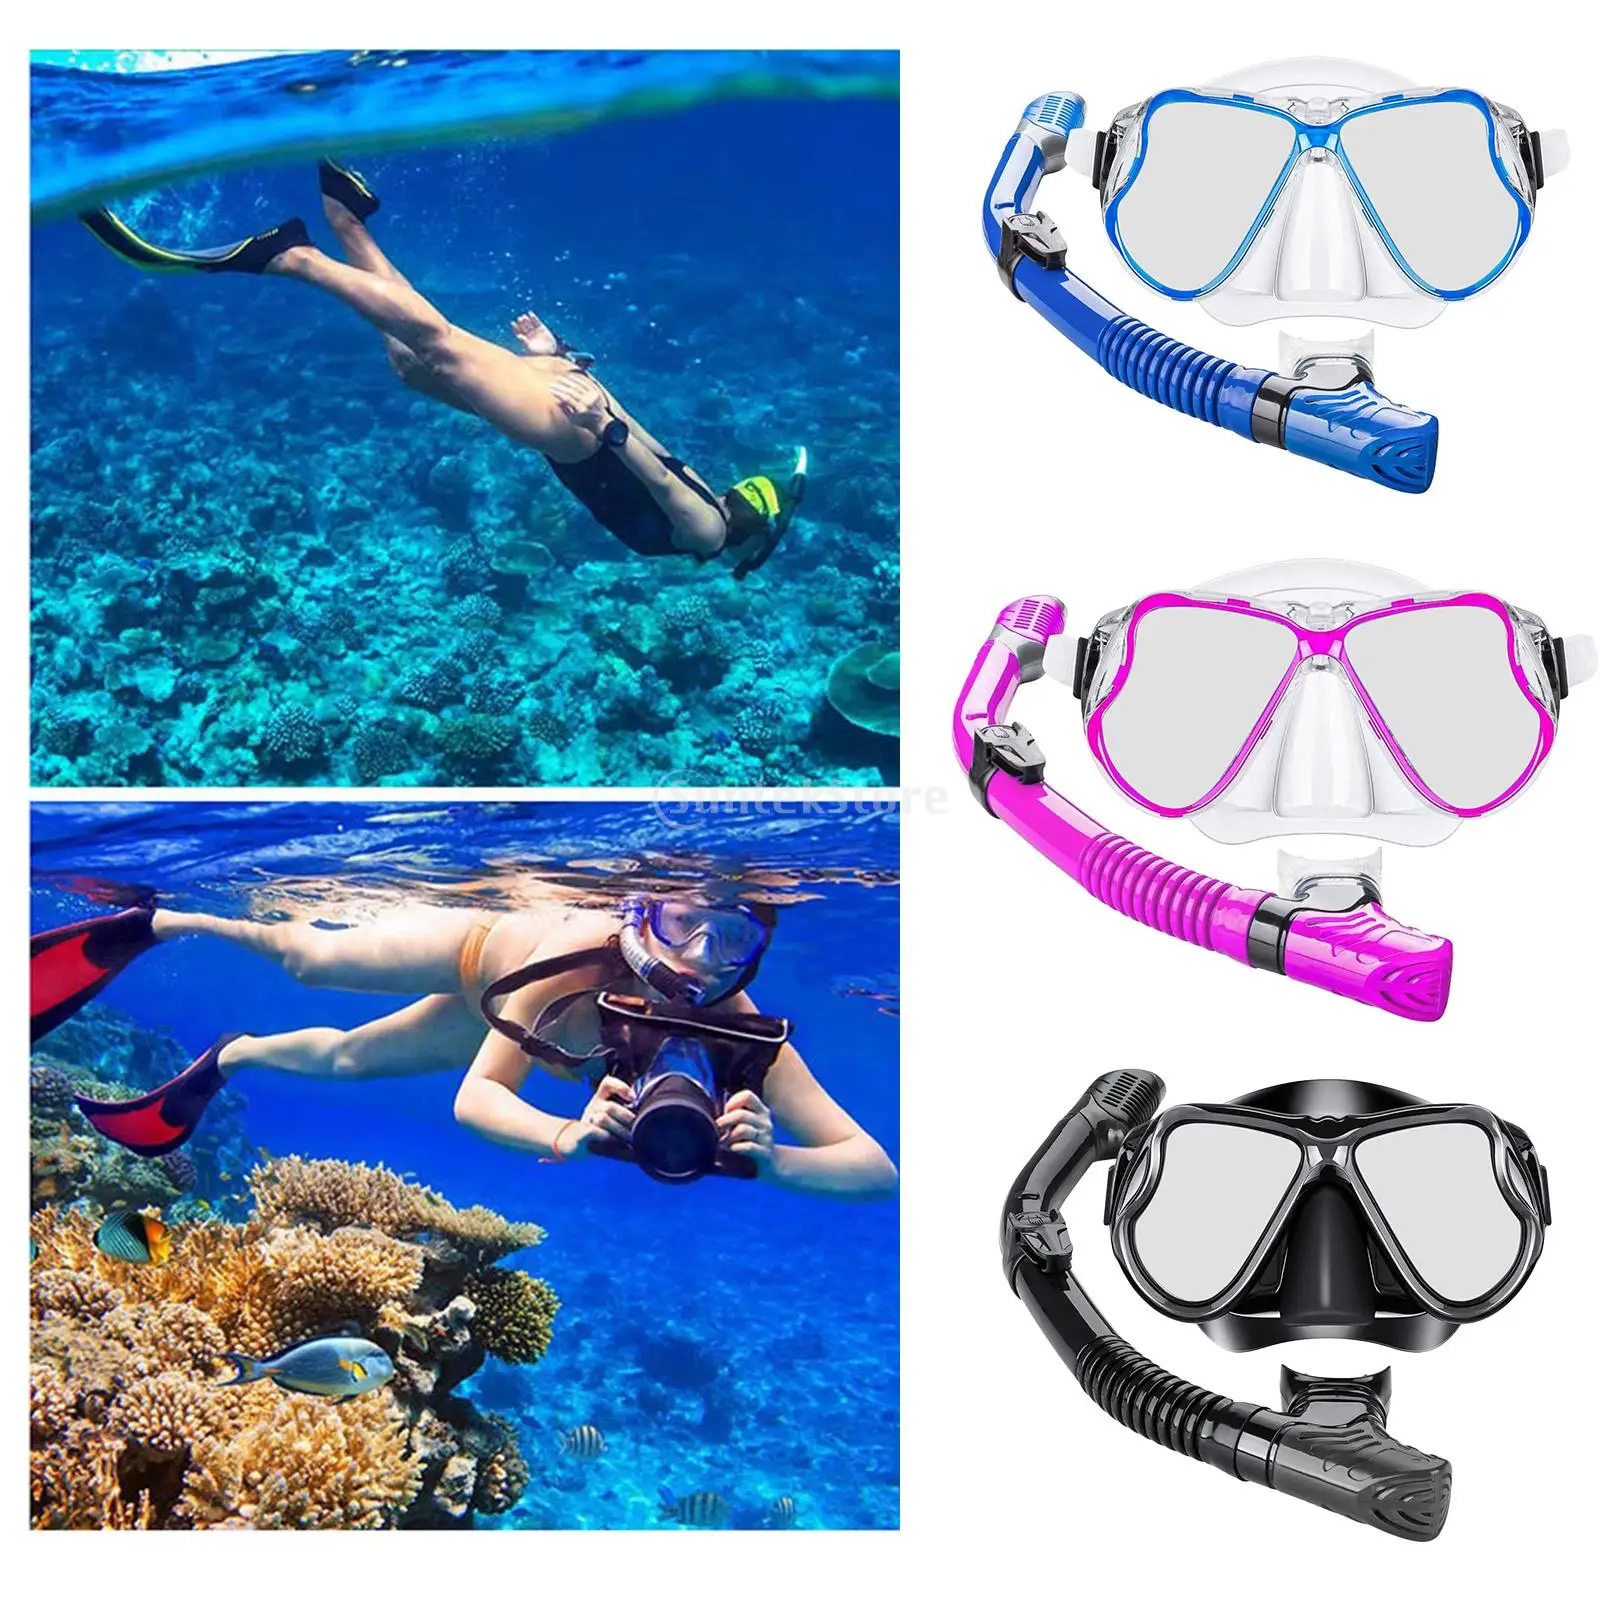 Swimming Goggles Divers Mask Dry Snorkel Set Snorkeling Dive Equip Gear Kit 